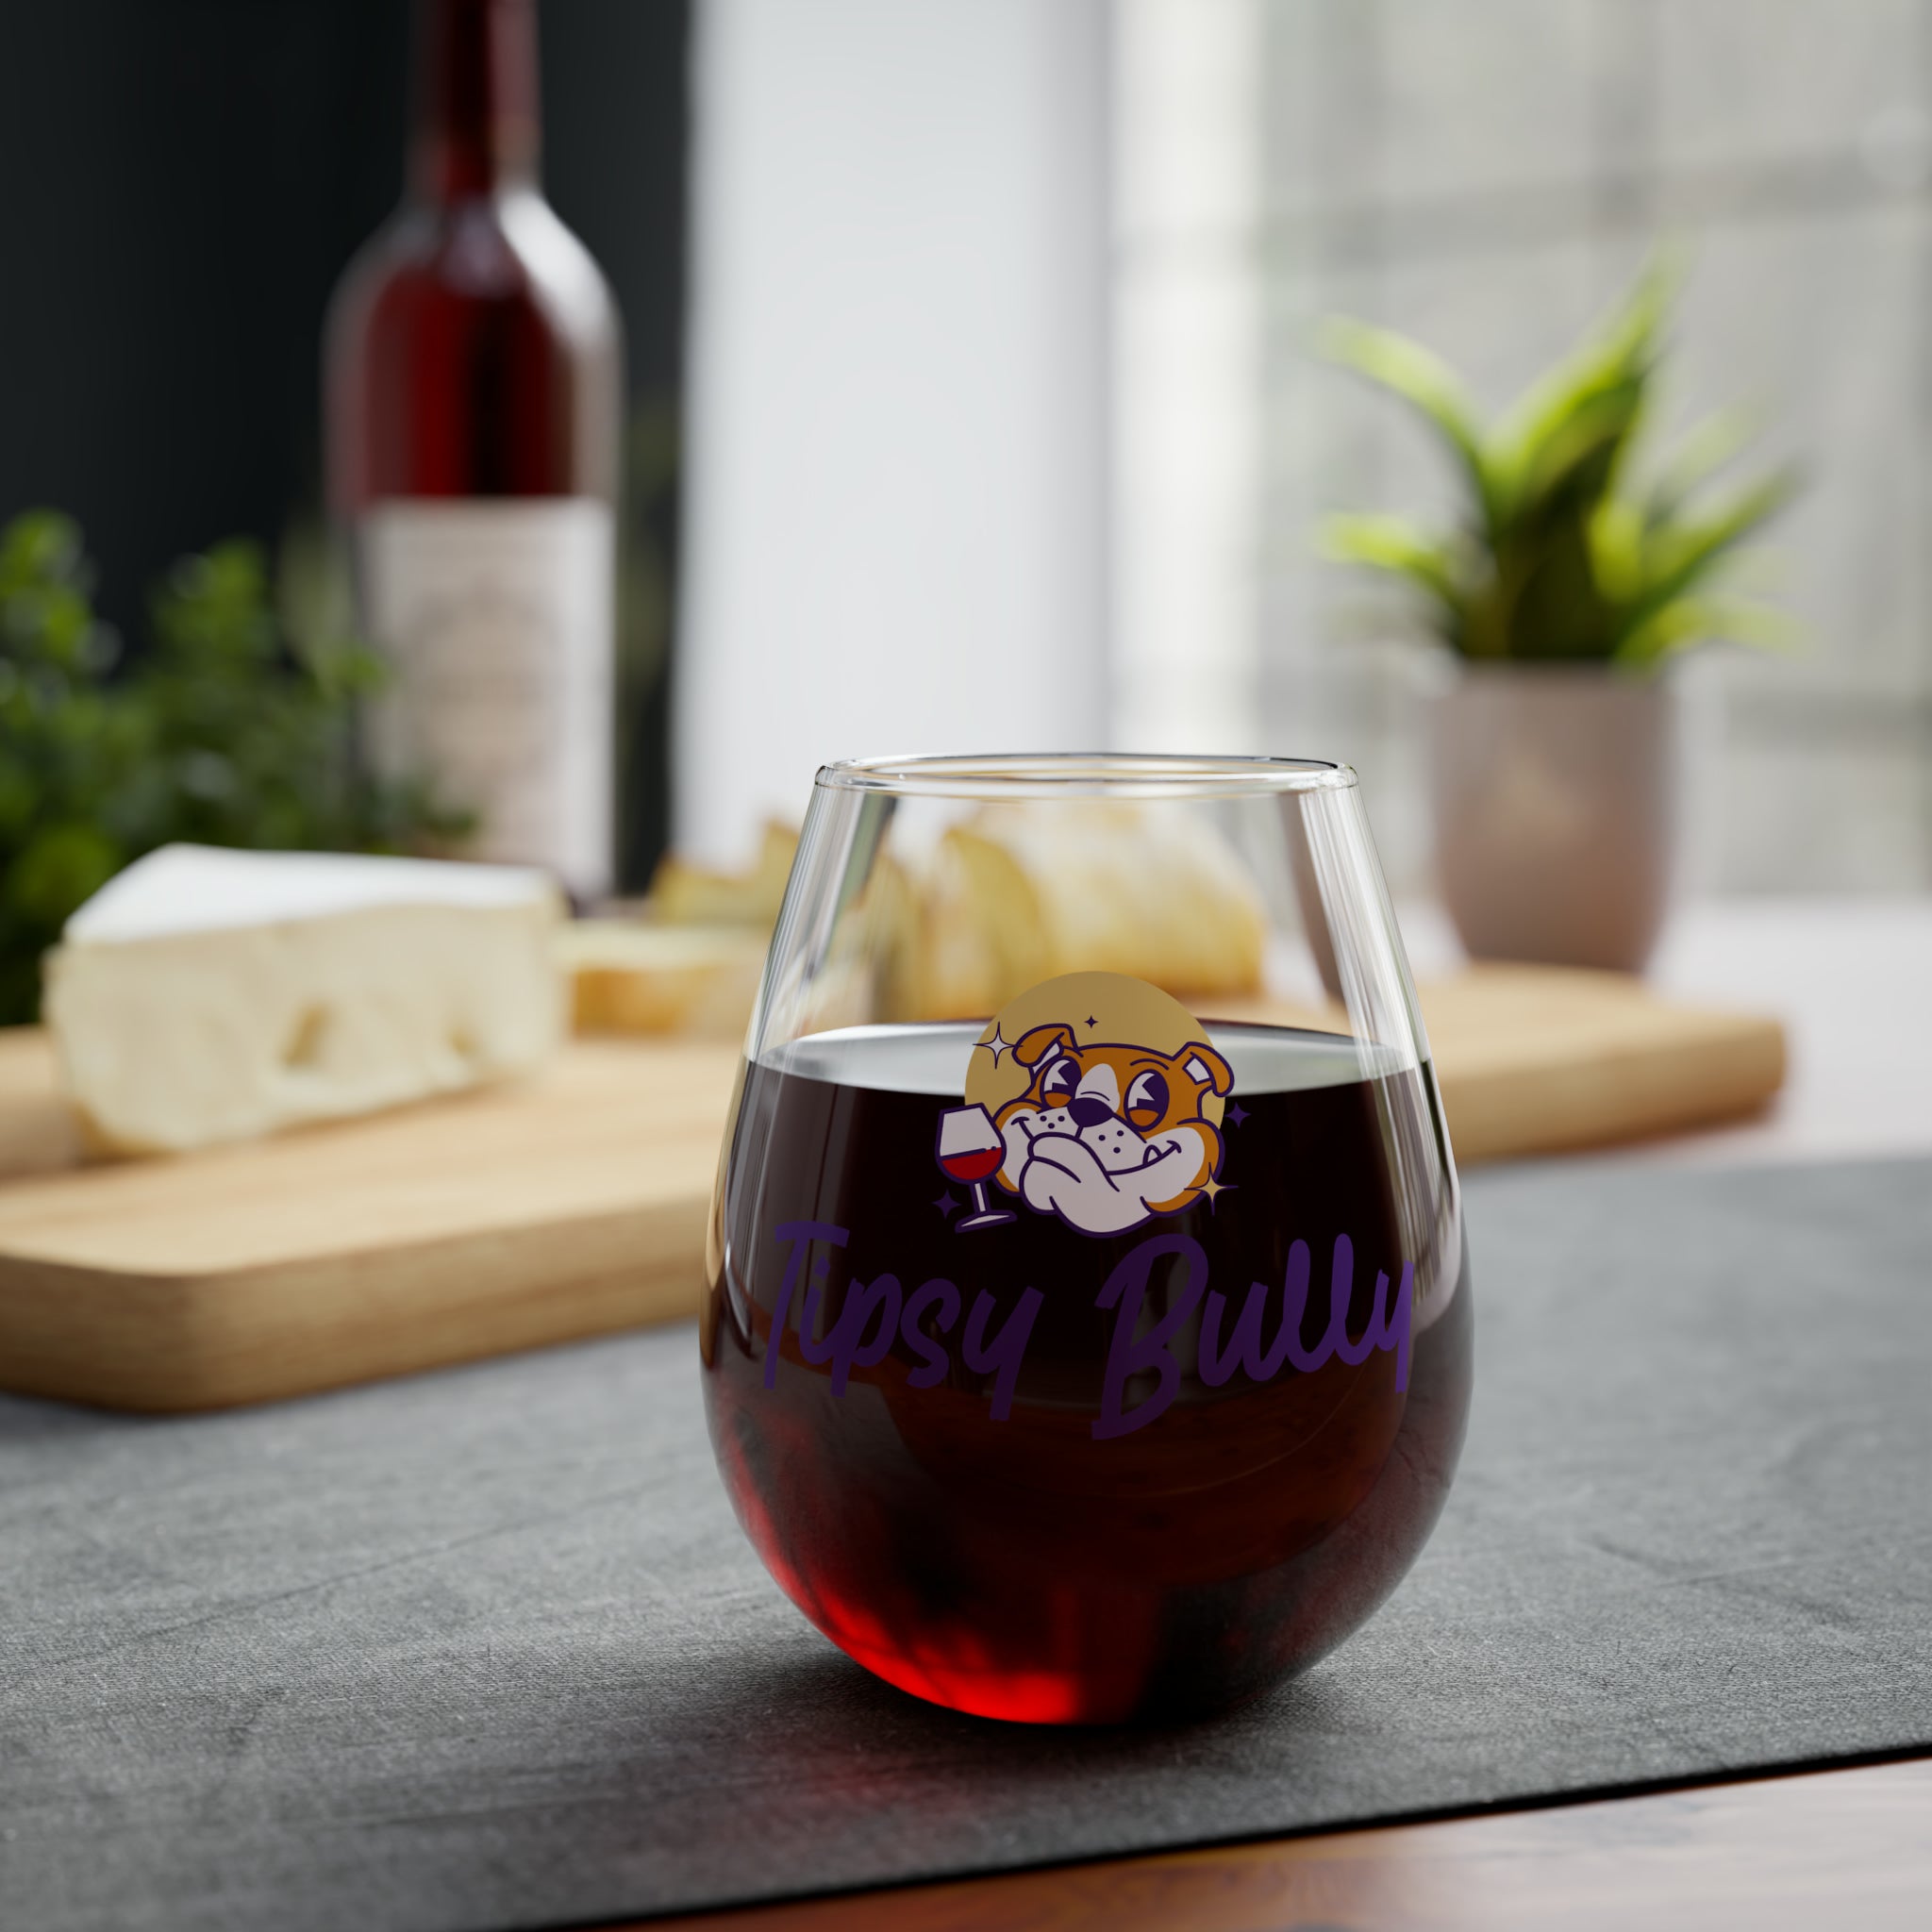 Tipsy Bully's Signature Sipper: The Stemless Wonder 🍷🐶